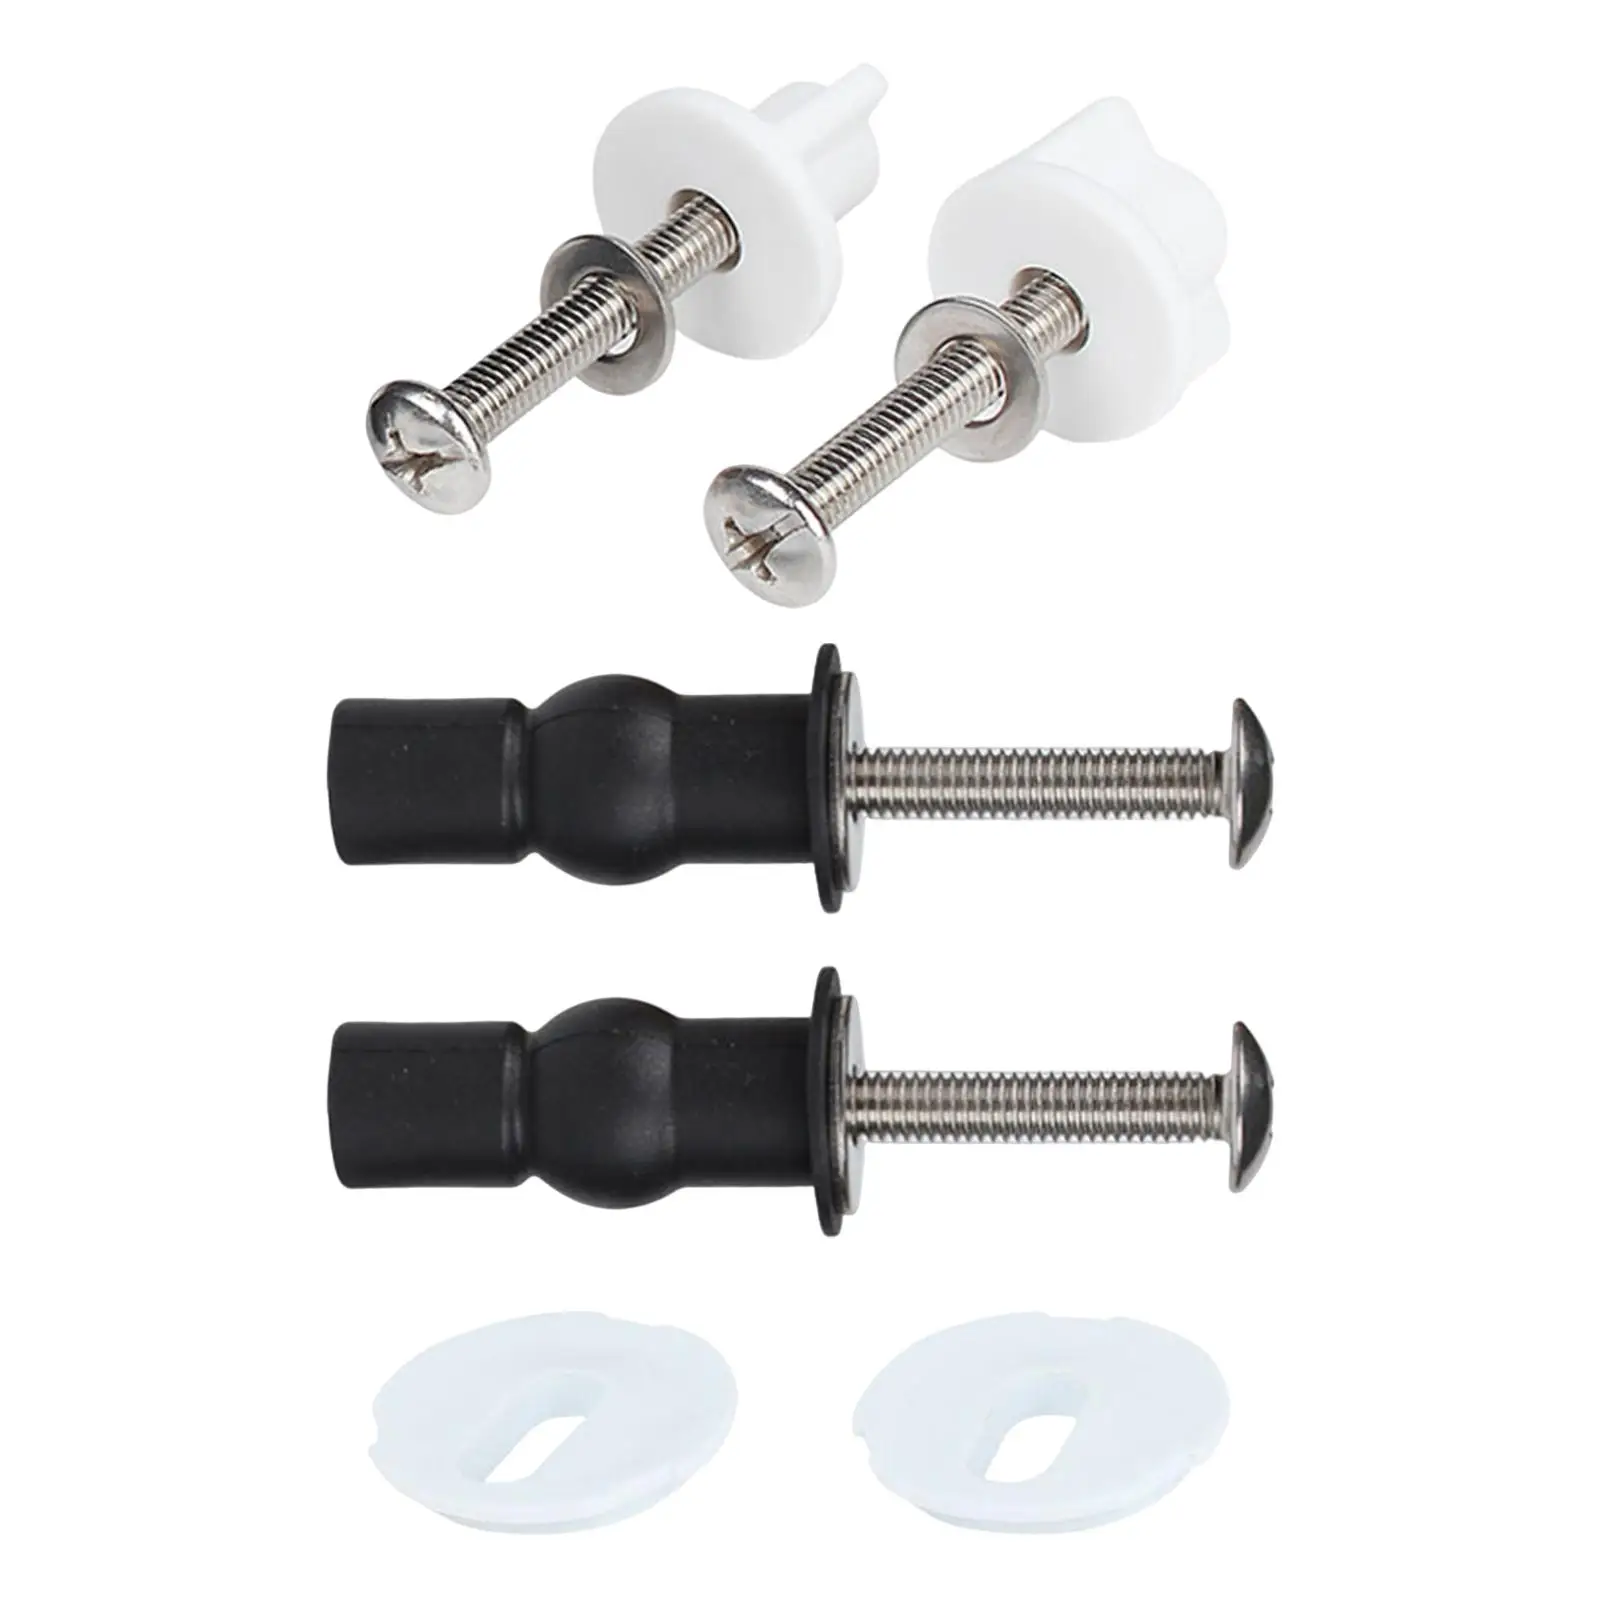 2 Pieces Toilet Seat Screws Bolts Bathroom Toilet Repair Screw with Rubber Washers and Wing Nuts Top Mounted Toilet Seat Hinges